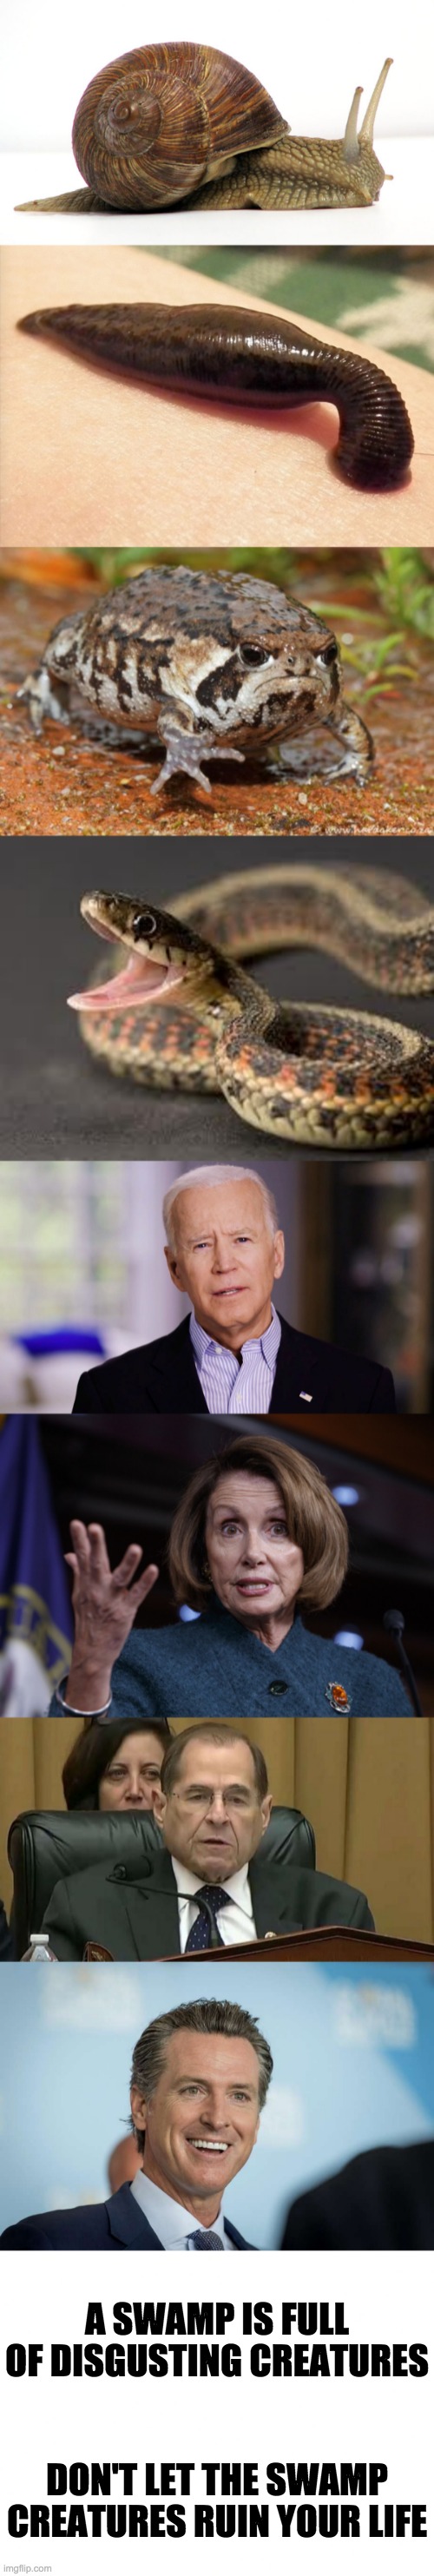 Swamp Creatures are Disgusting | A SWAMP IS FULL OF DISGUSTING CREATURES; DON'T LET THE SWAMP CREATURES RUIN YOUR LIFE | image tagged in memes,grumpy toad,warning snake,joe biden 2020,good old nancy pelosi,rep jerry nadler | made w/ Imgflip meme maker